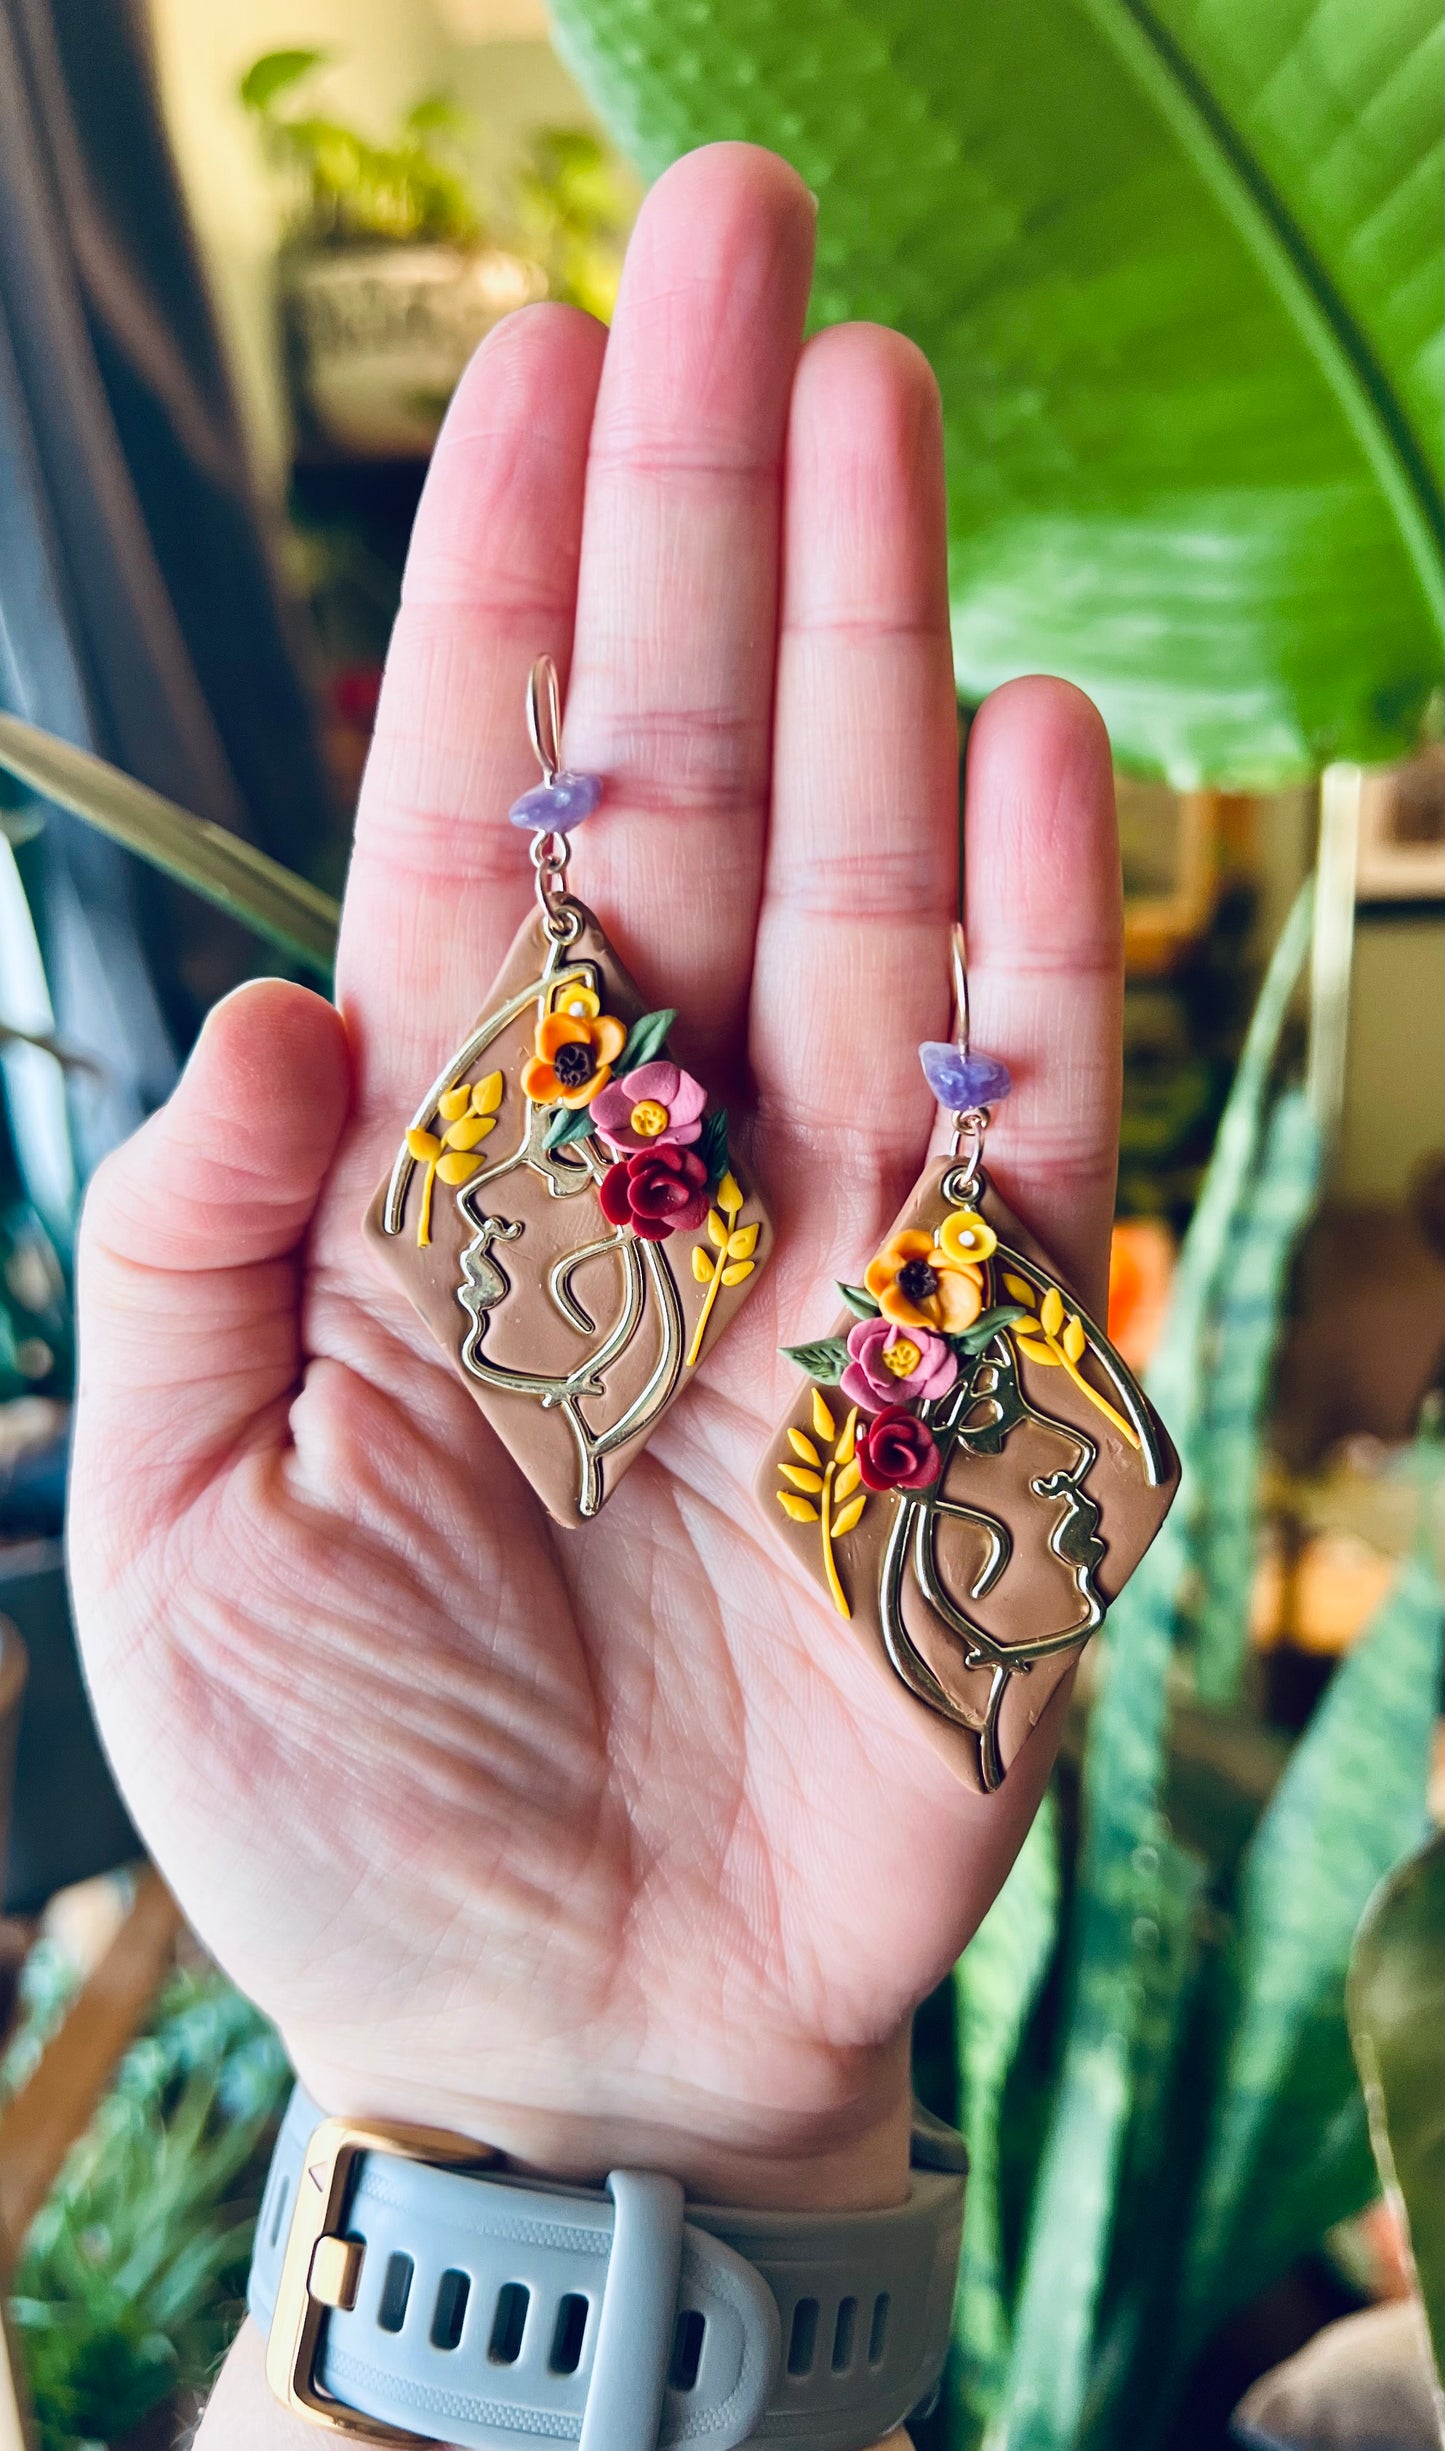 Elegant polymer clay Virgo earrings adorned with a stunning amethyst healing crystal accent. Handcrafted with care, these earrings embody Virgo's meticulous nature while harnessing the calming and protective properties of amethyst. Elevate your style and energy with these artisanal accessories. Available now!